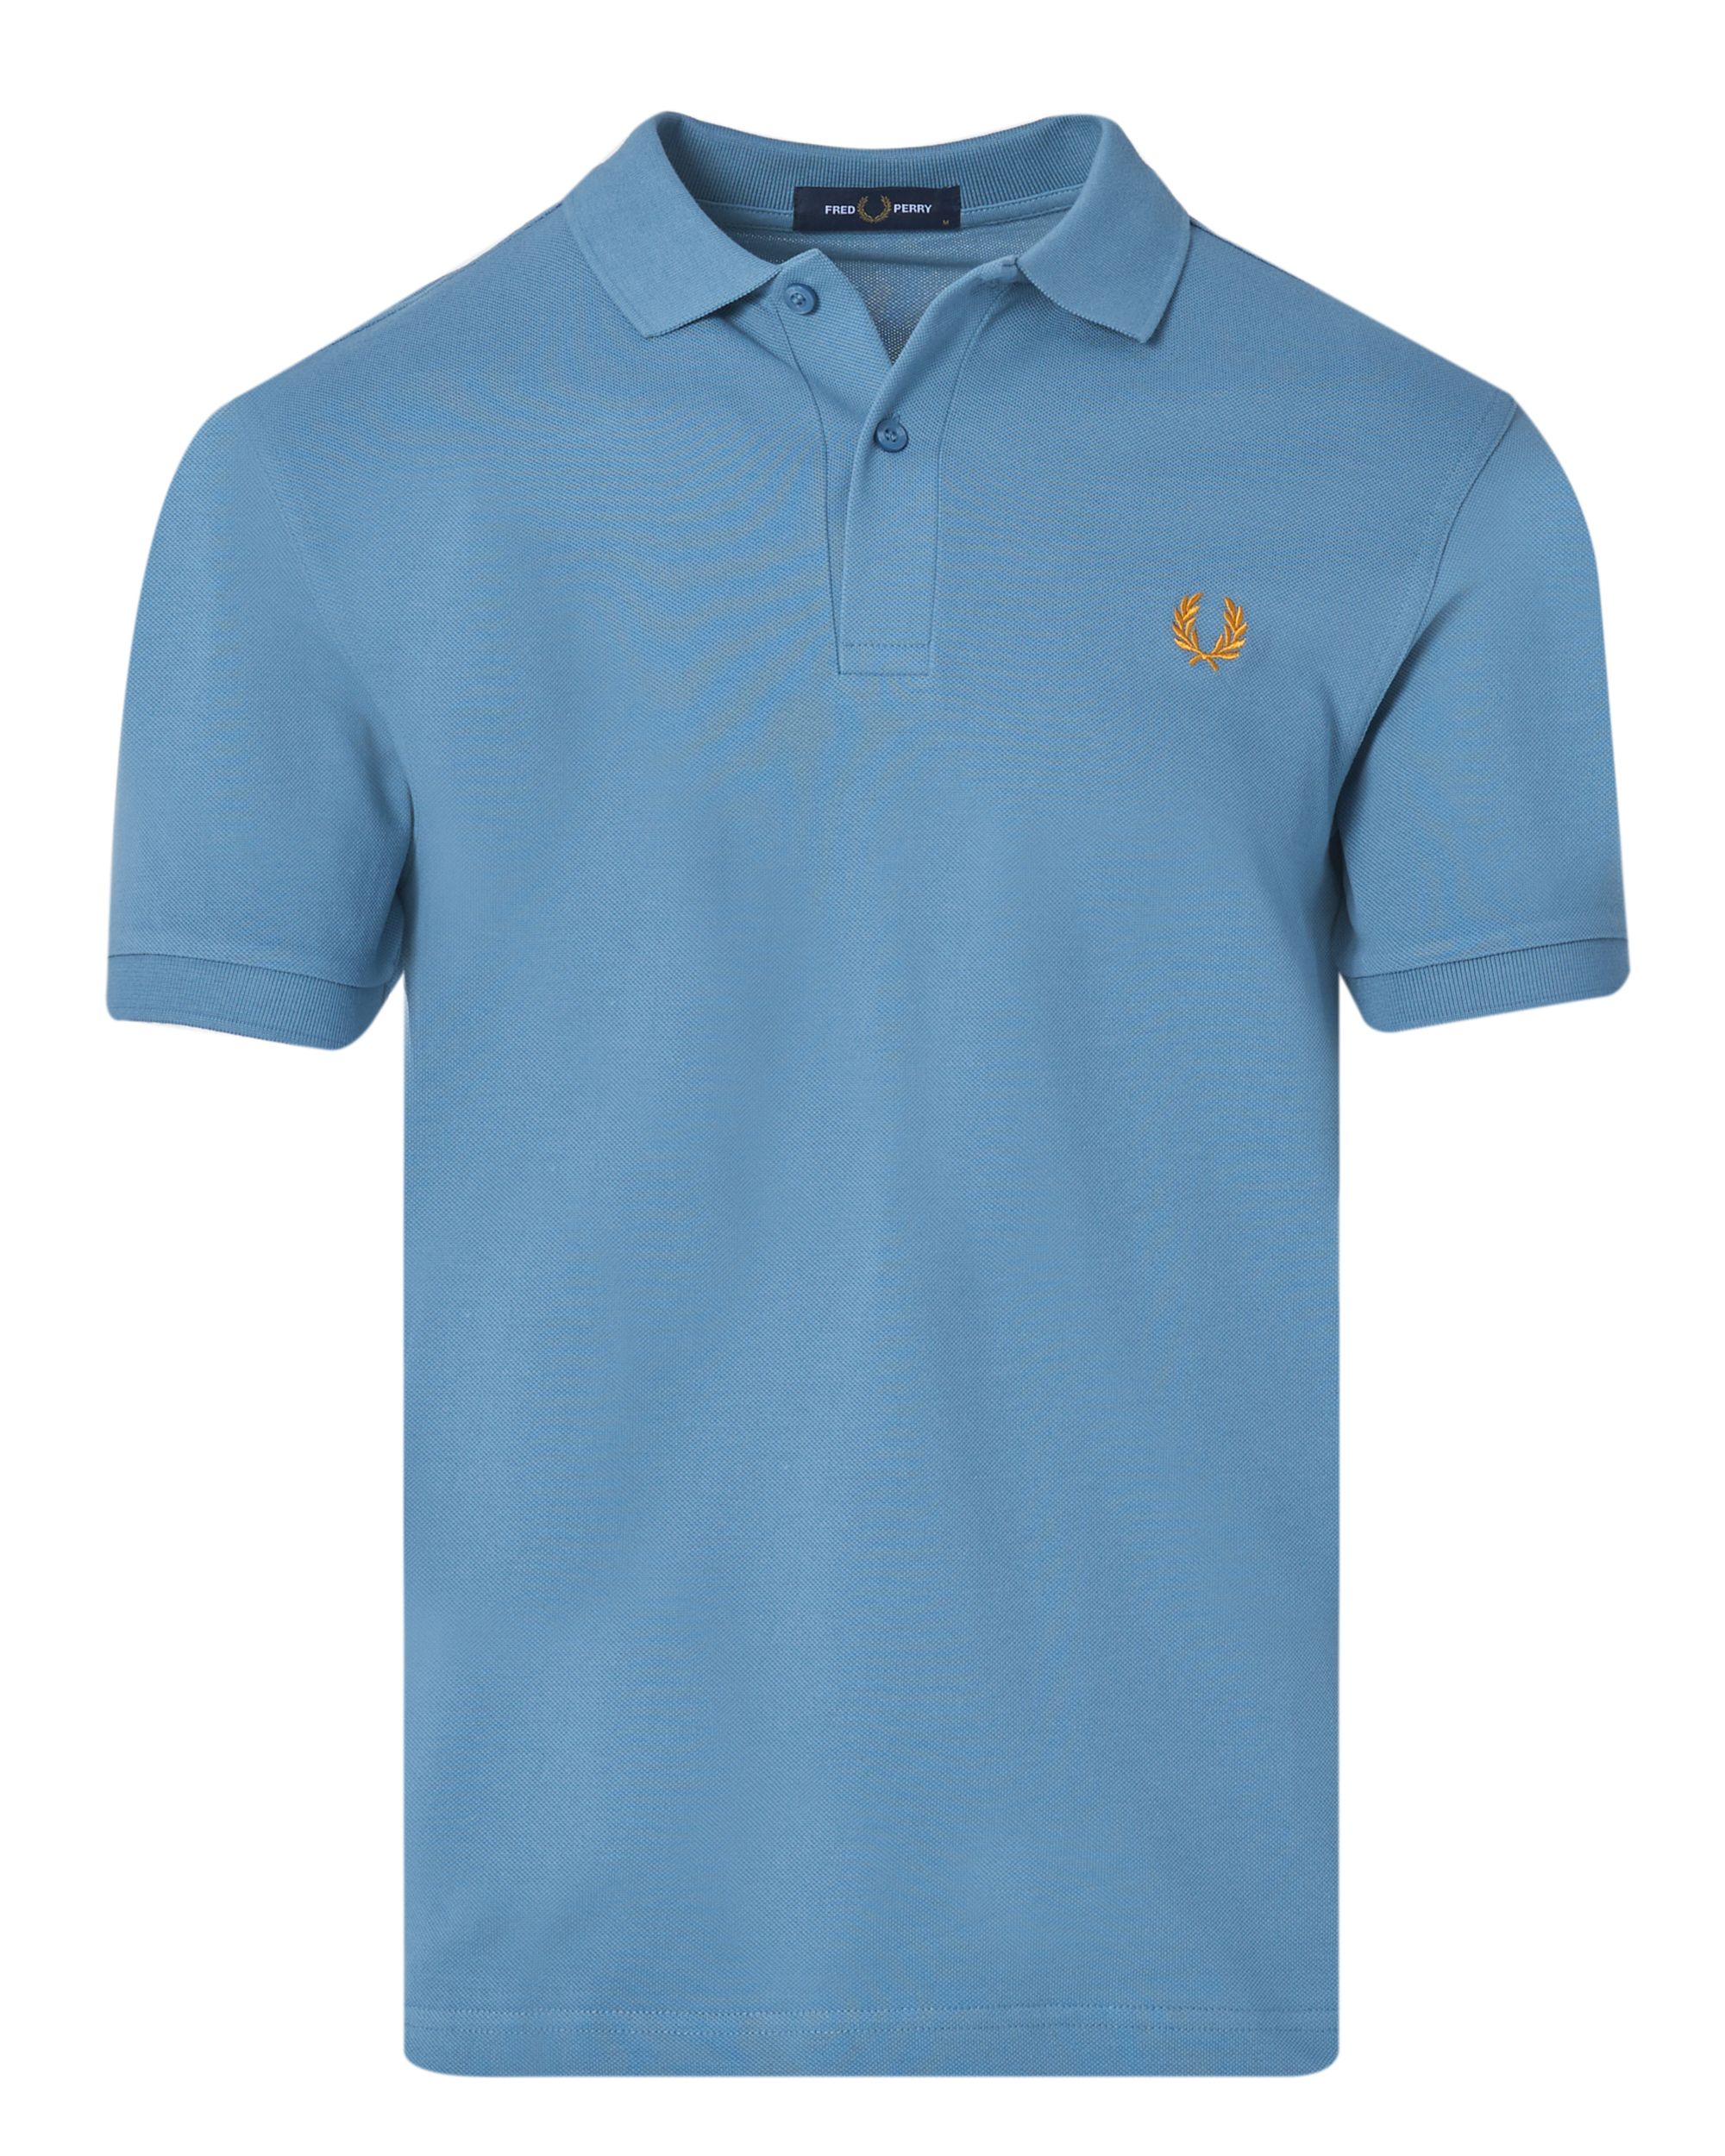 Fred Perry Polo KM Blauw 083533-001-L